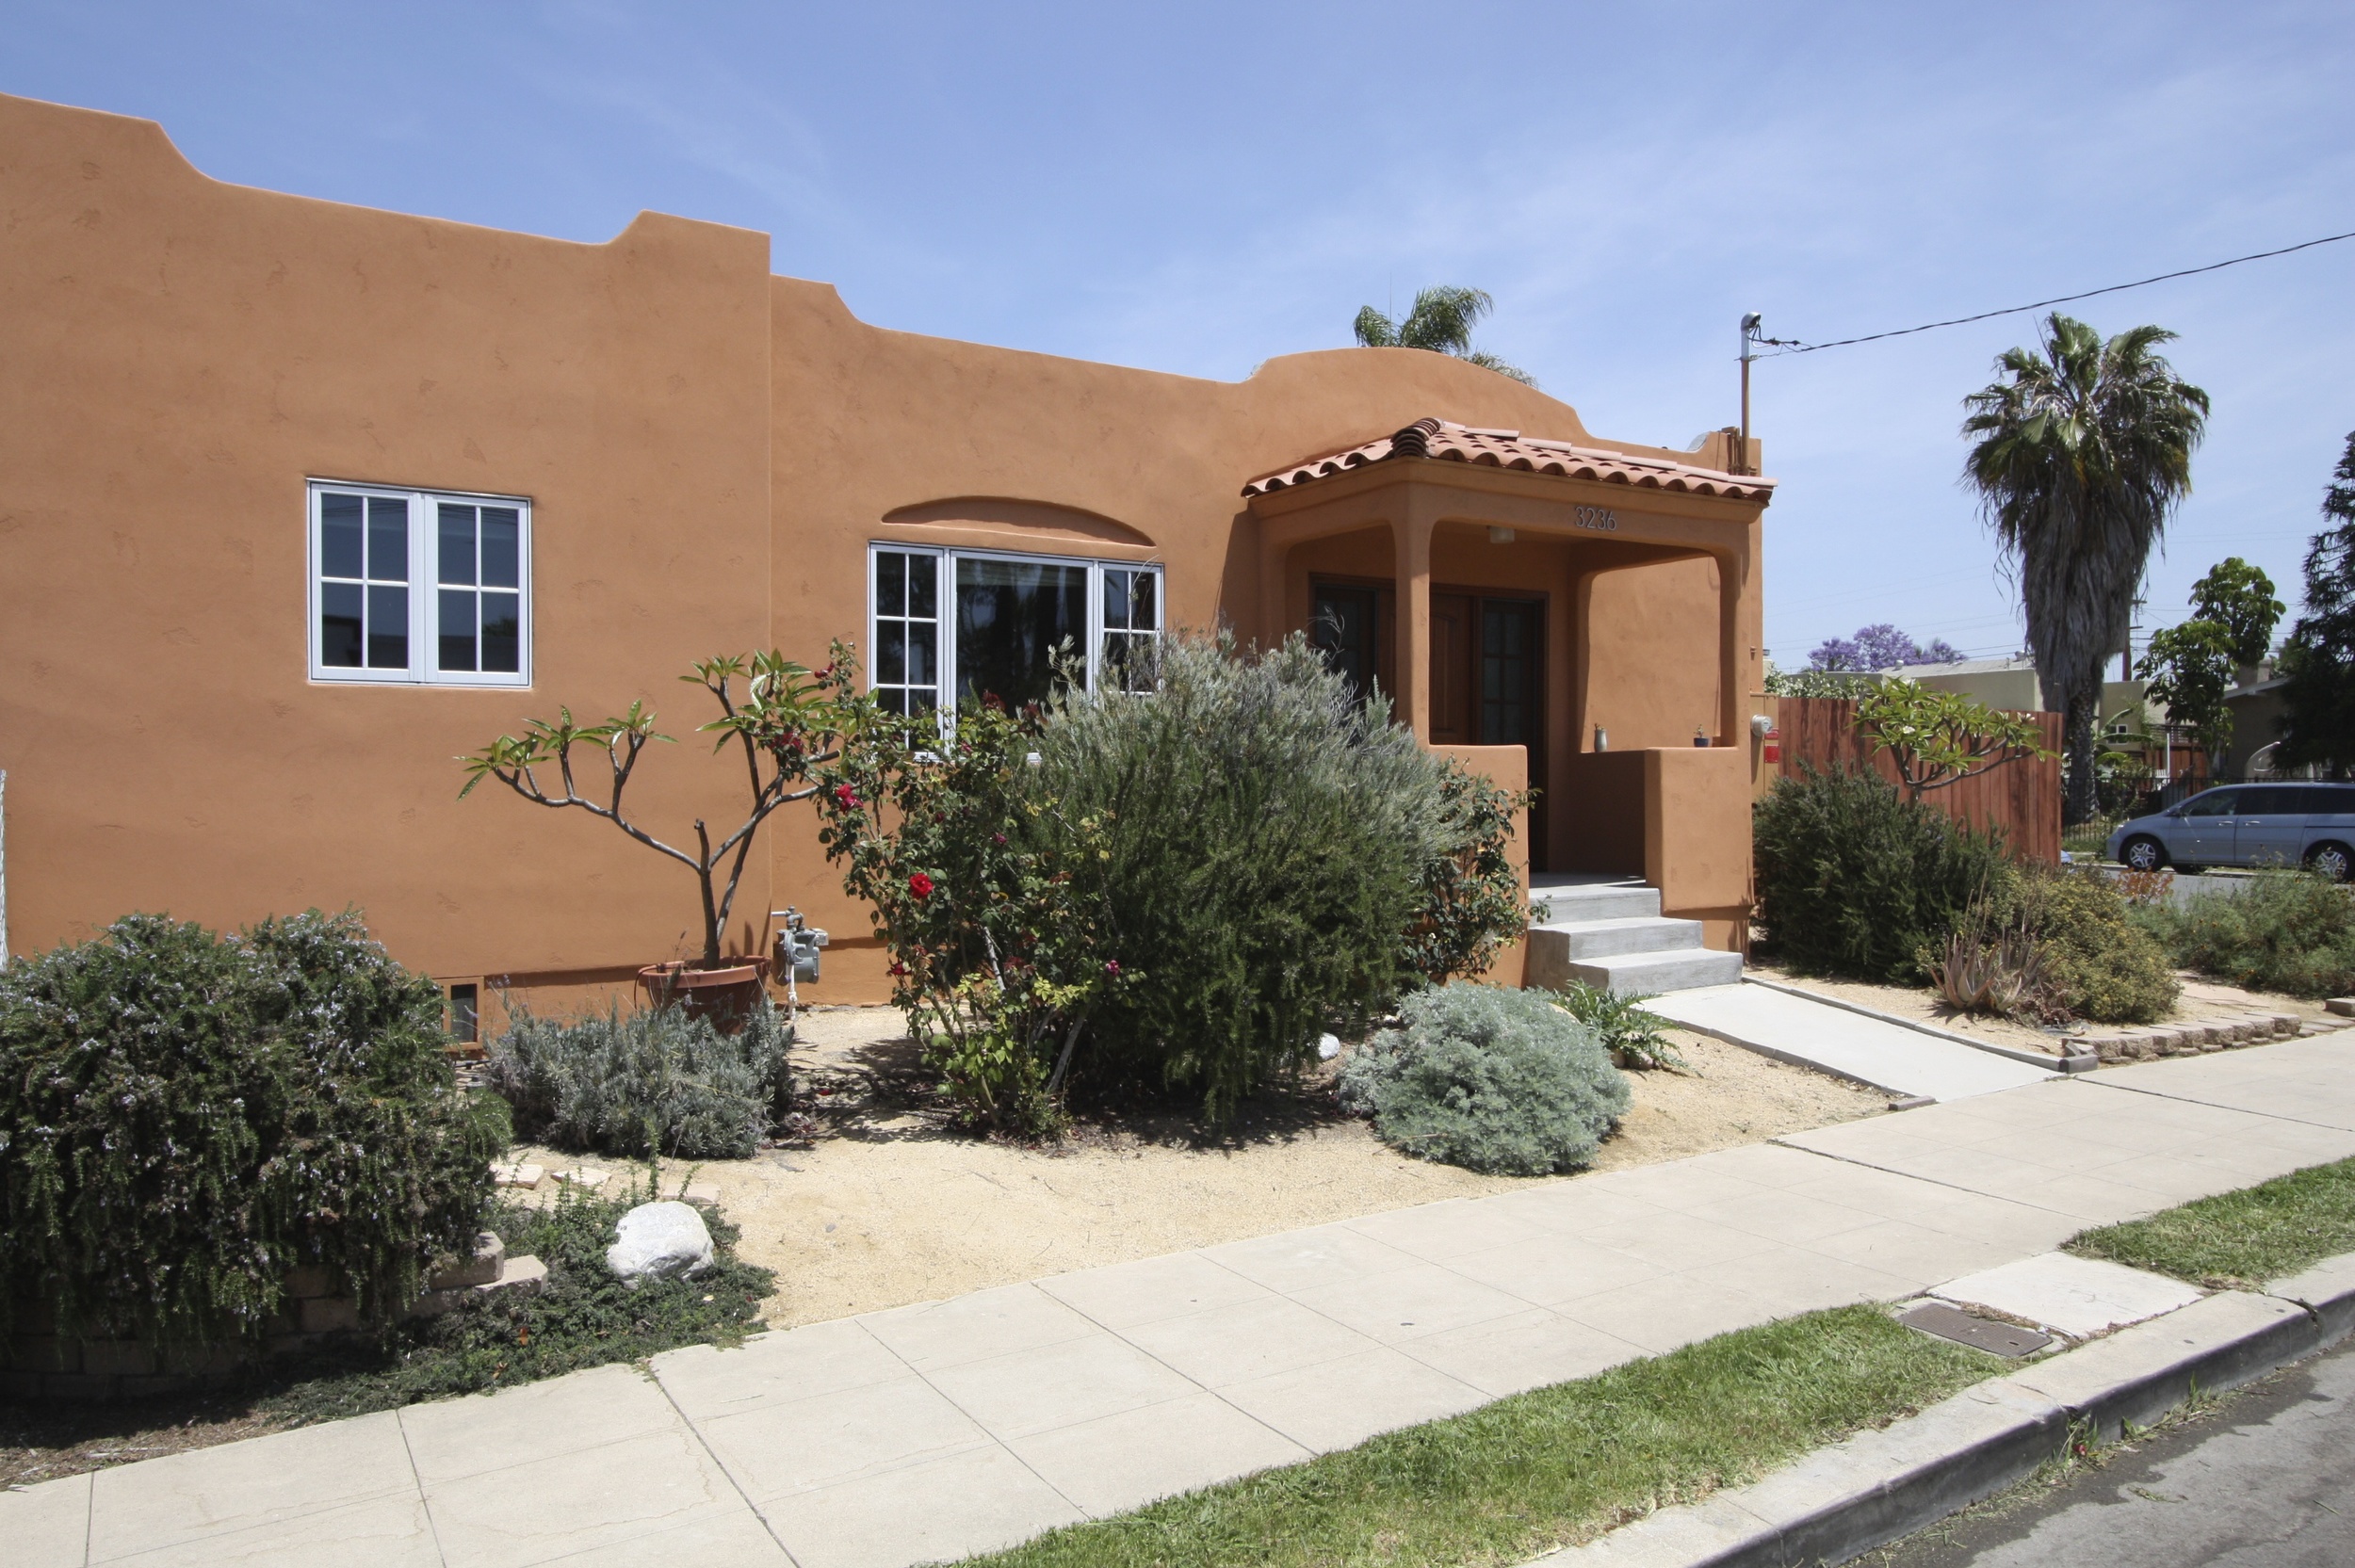  After: New stucco in a terra cotta color and new clay tiles on porch roof really compliment the style of the house. 